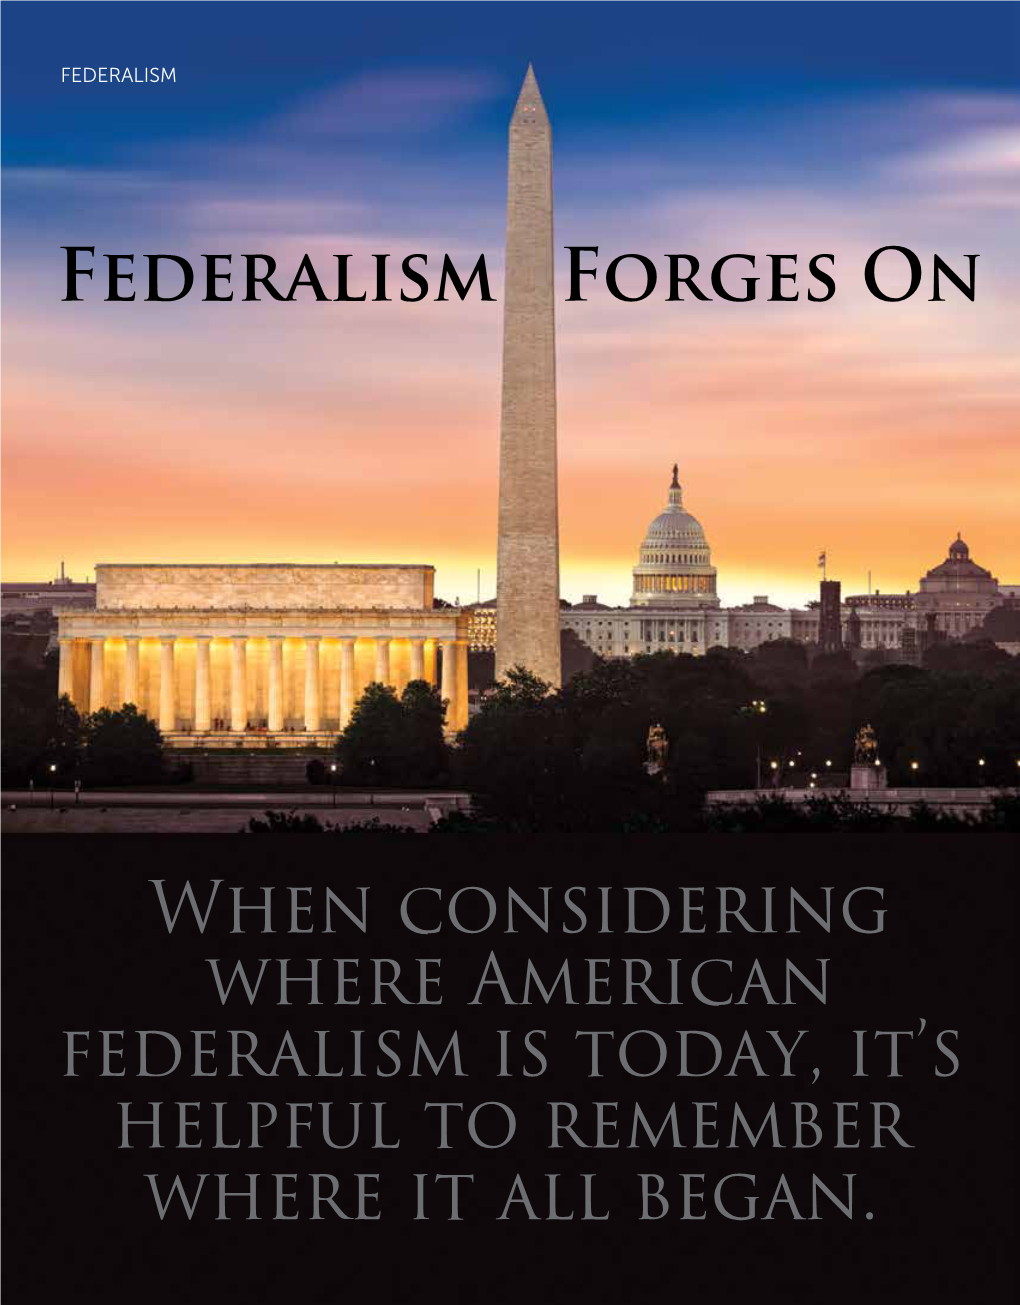 Federalism Forges On